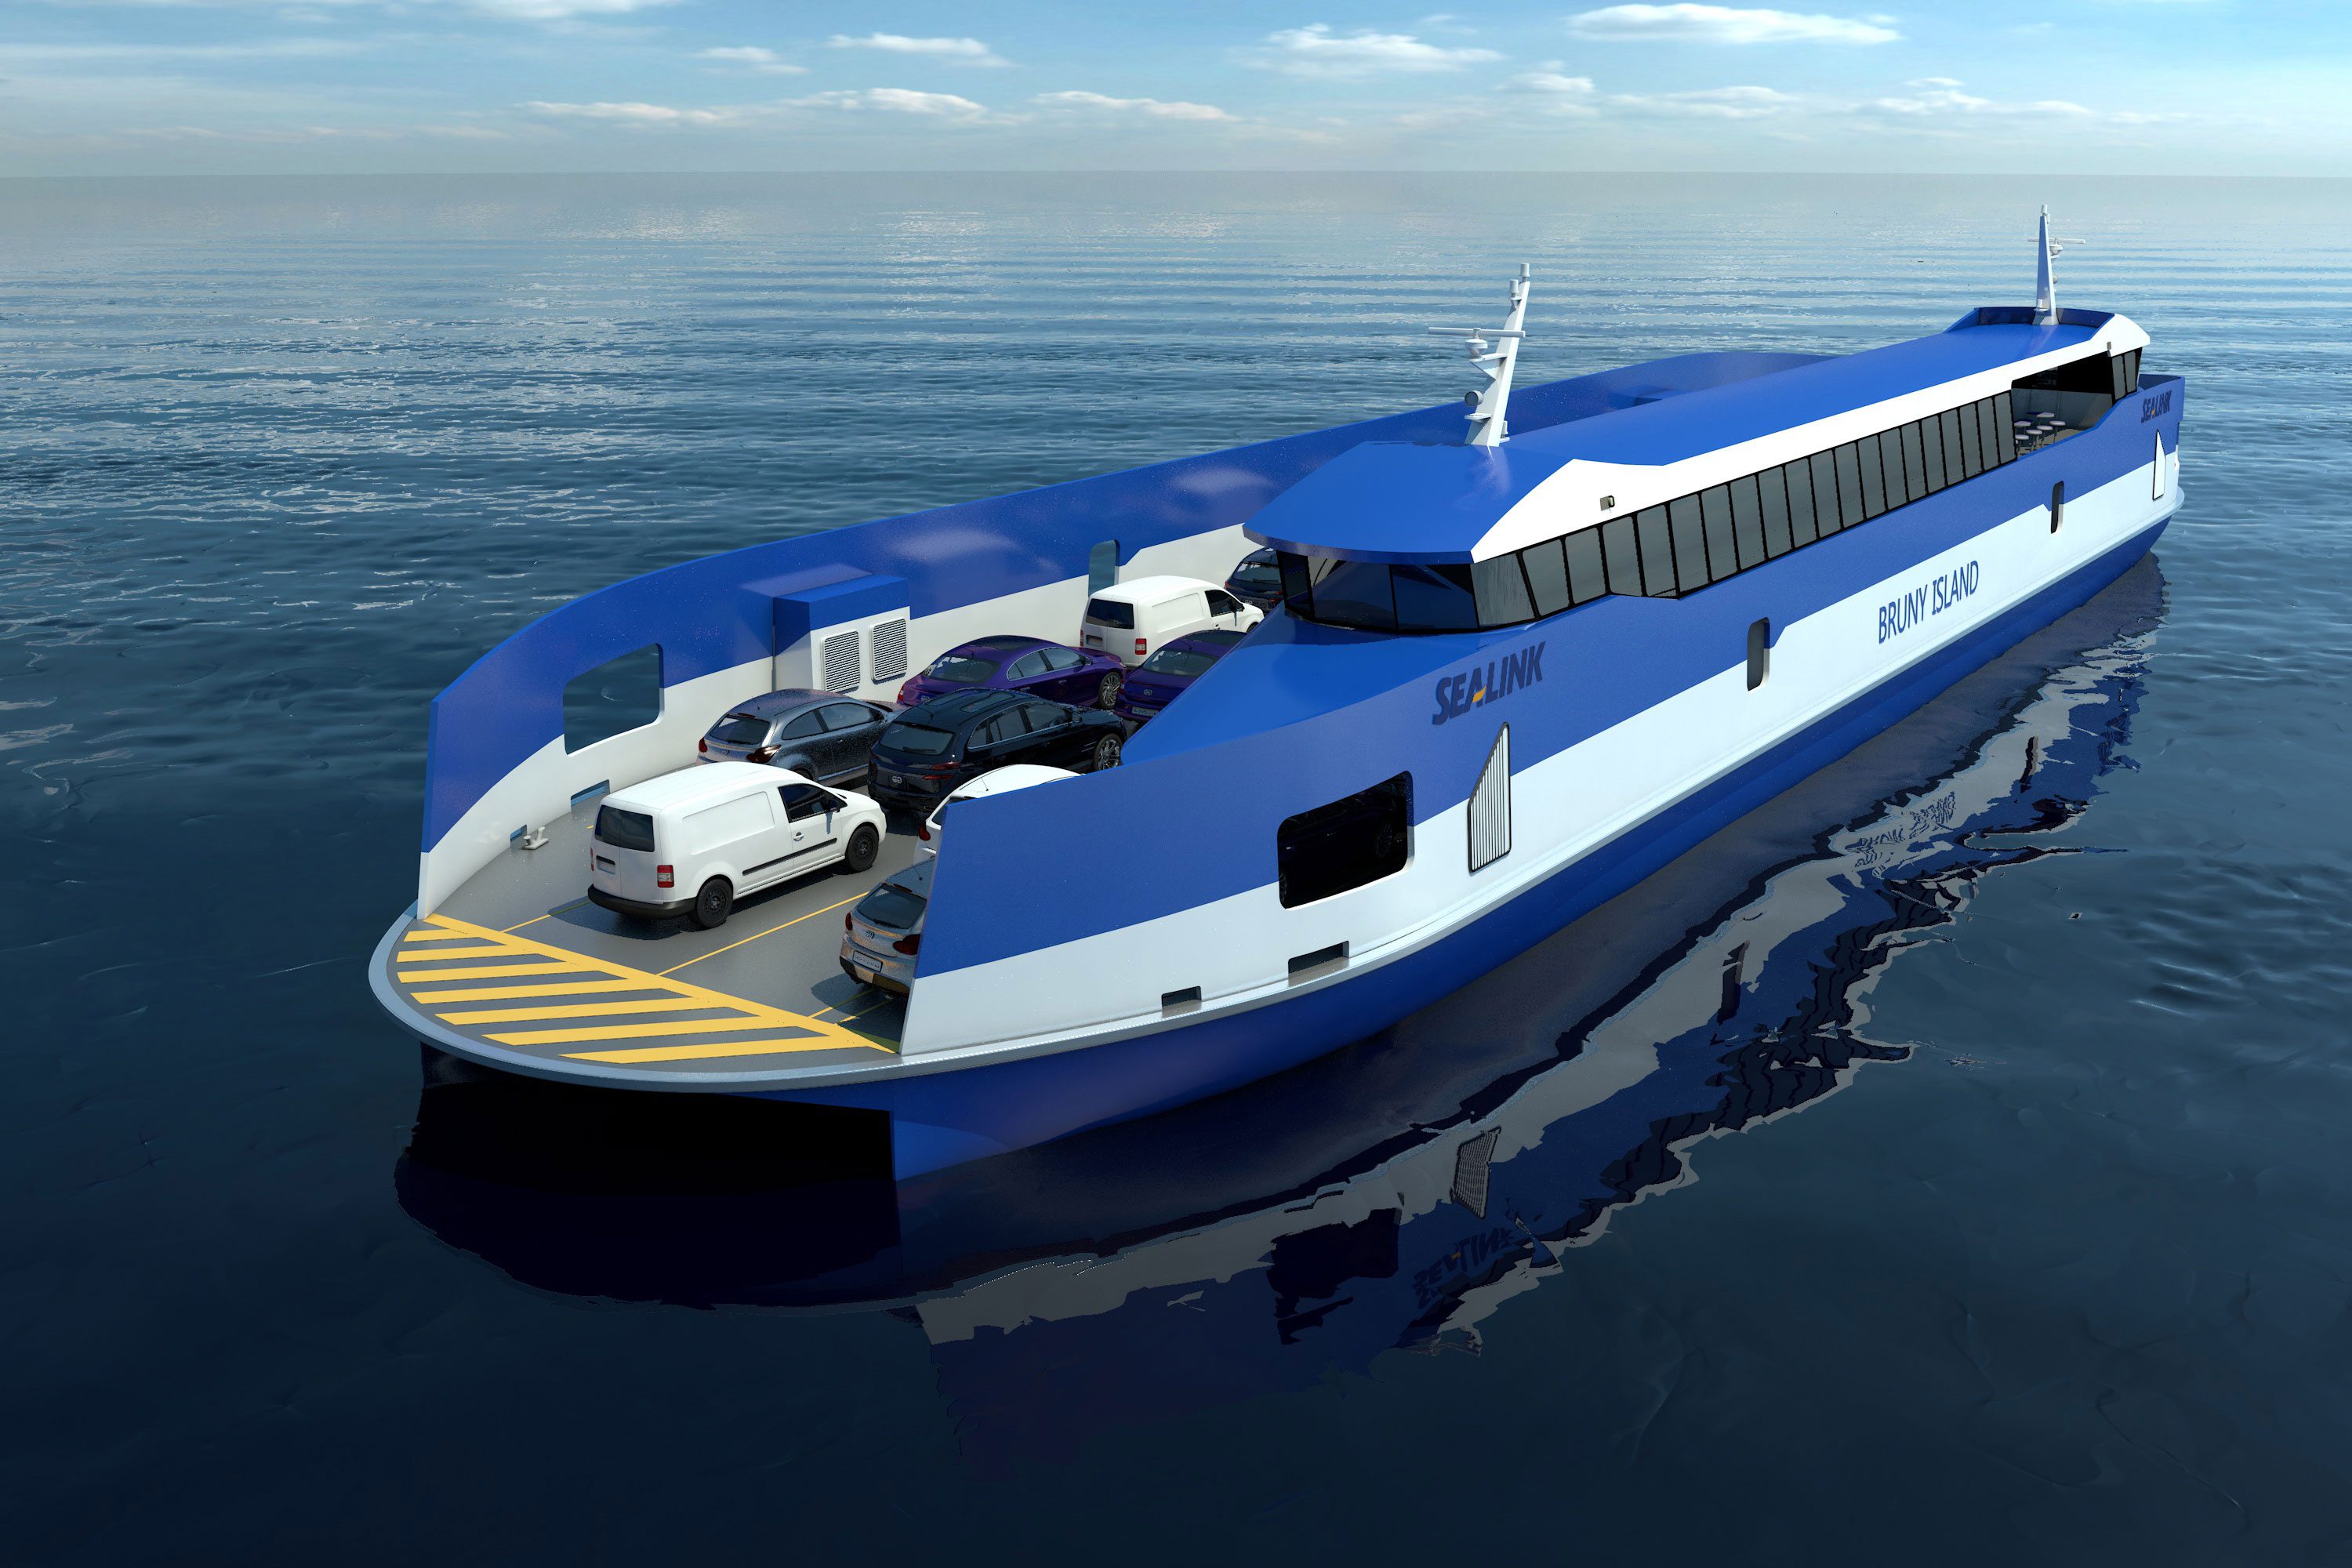 Incat Crowther Double-Ended Ro-Pax Ferry